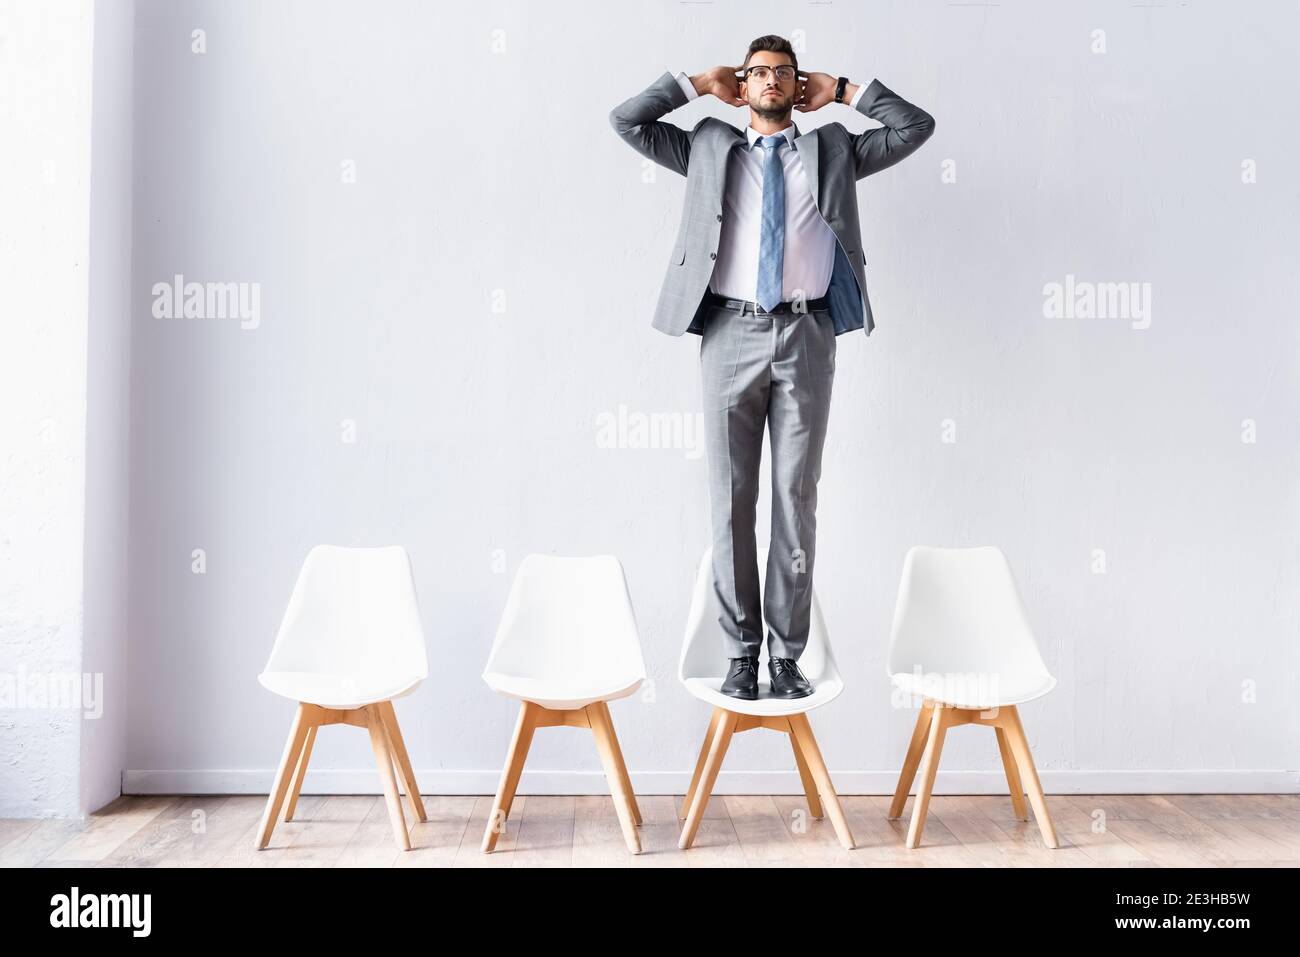 Businessman standing on chair near wall in office Stock Photo